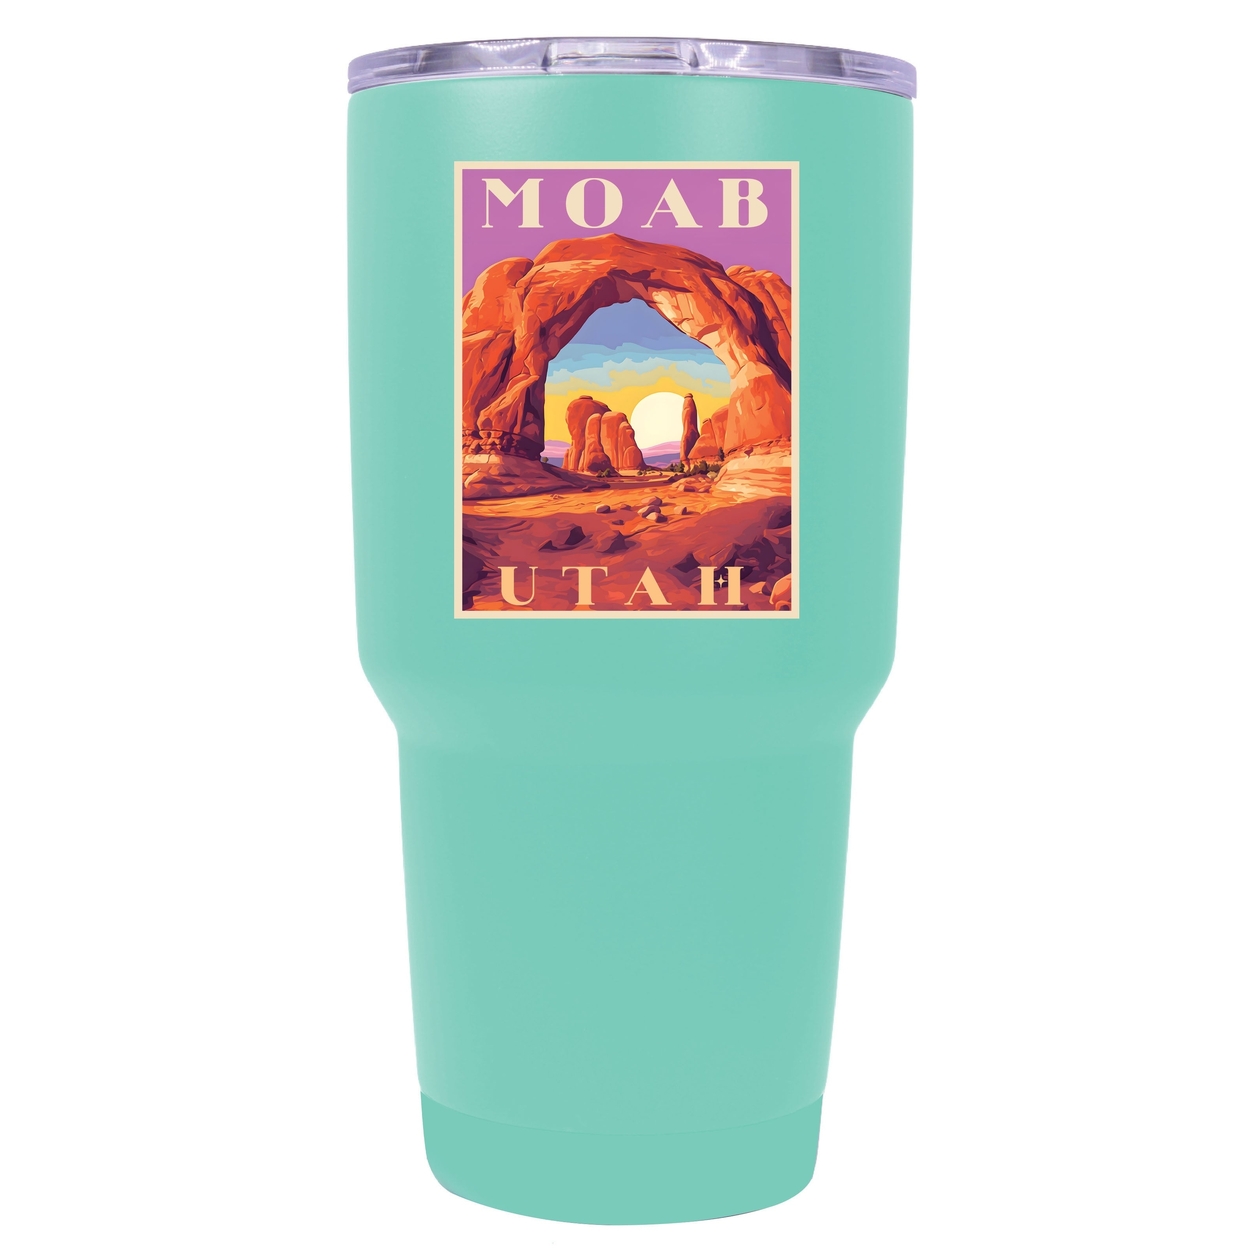 Moab Utah Souvenir 24 Oz Insulated Stainless Steel Tumbler - Red,,2-Pack